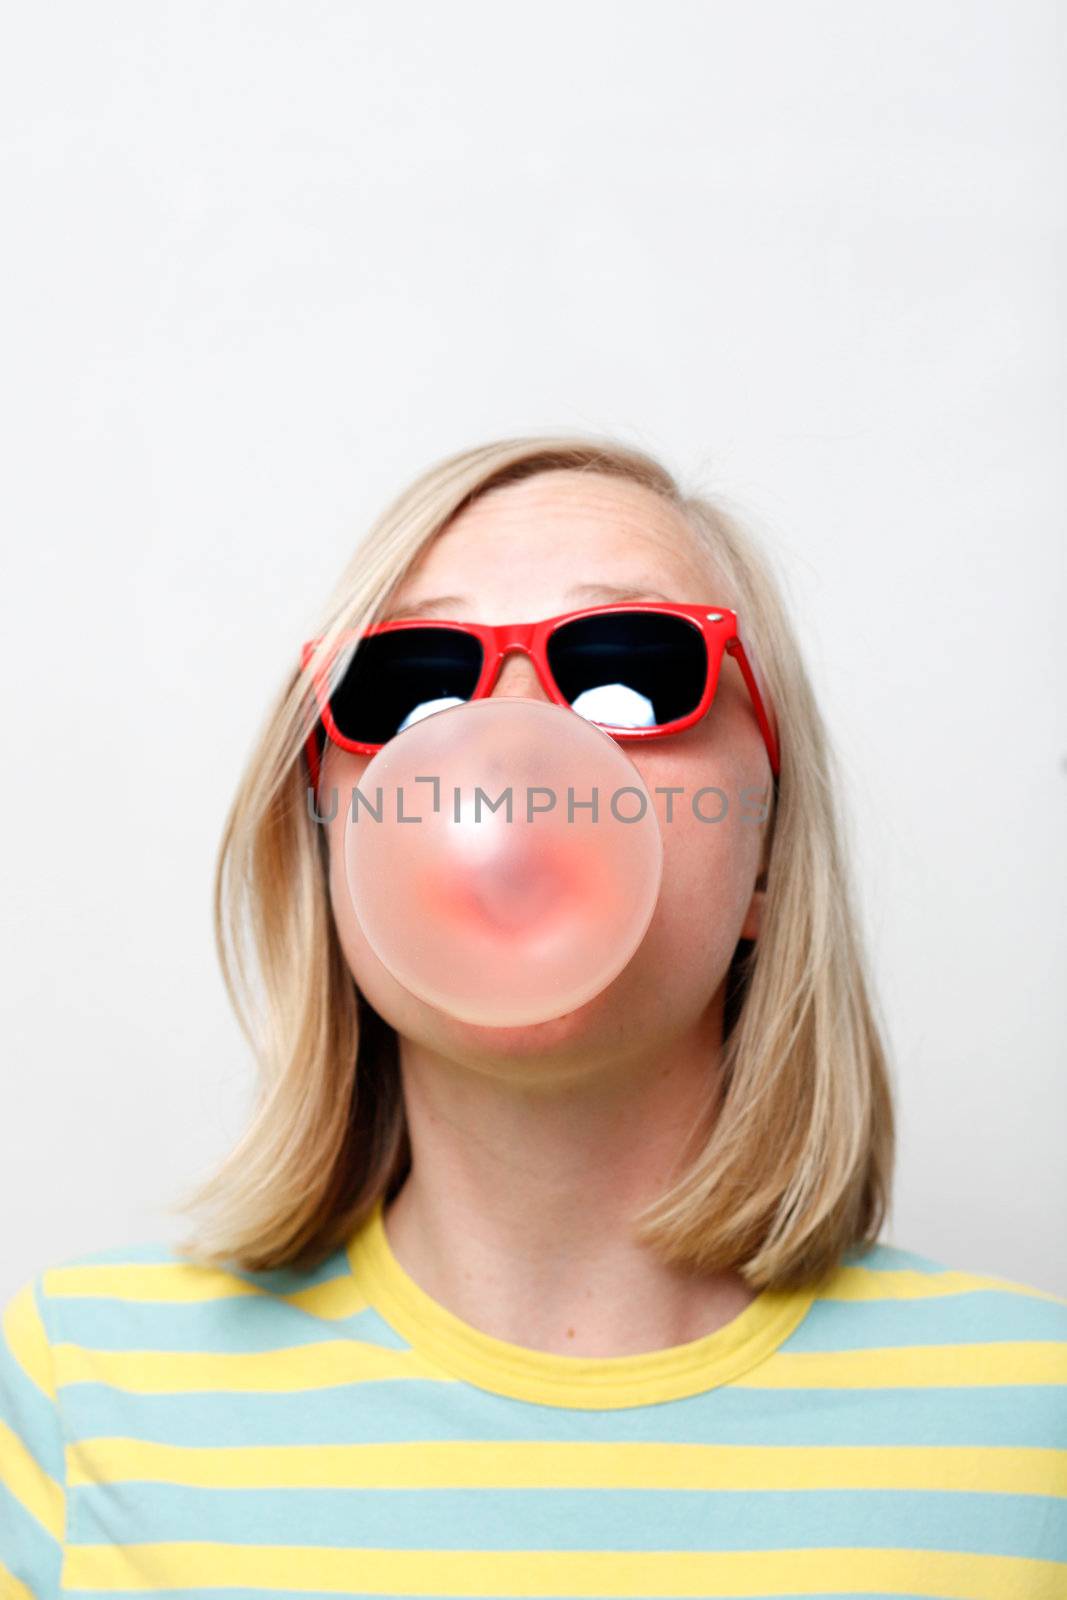 A girl playing with her chewing gum